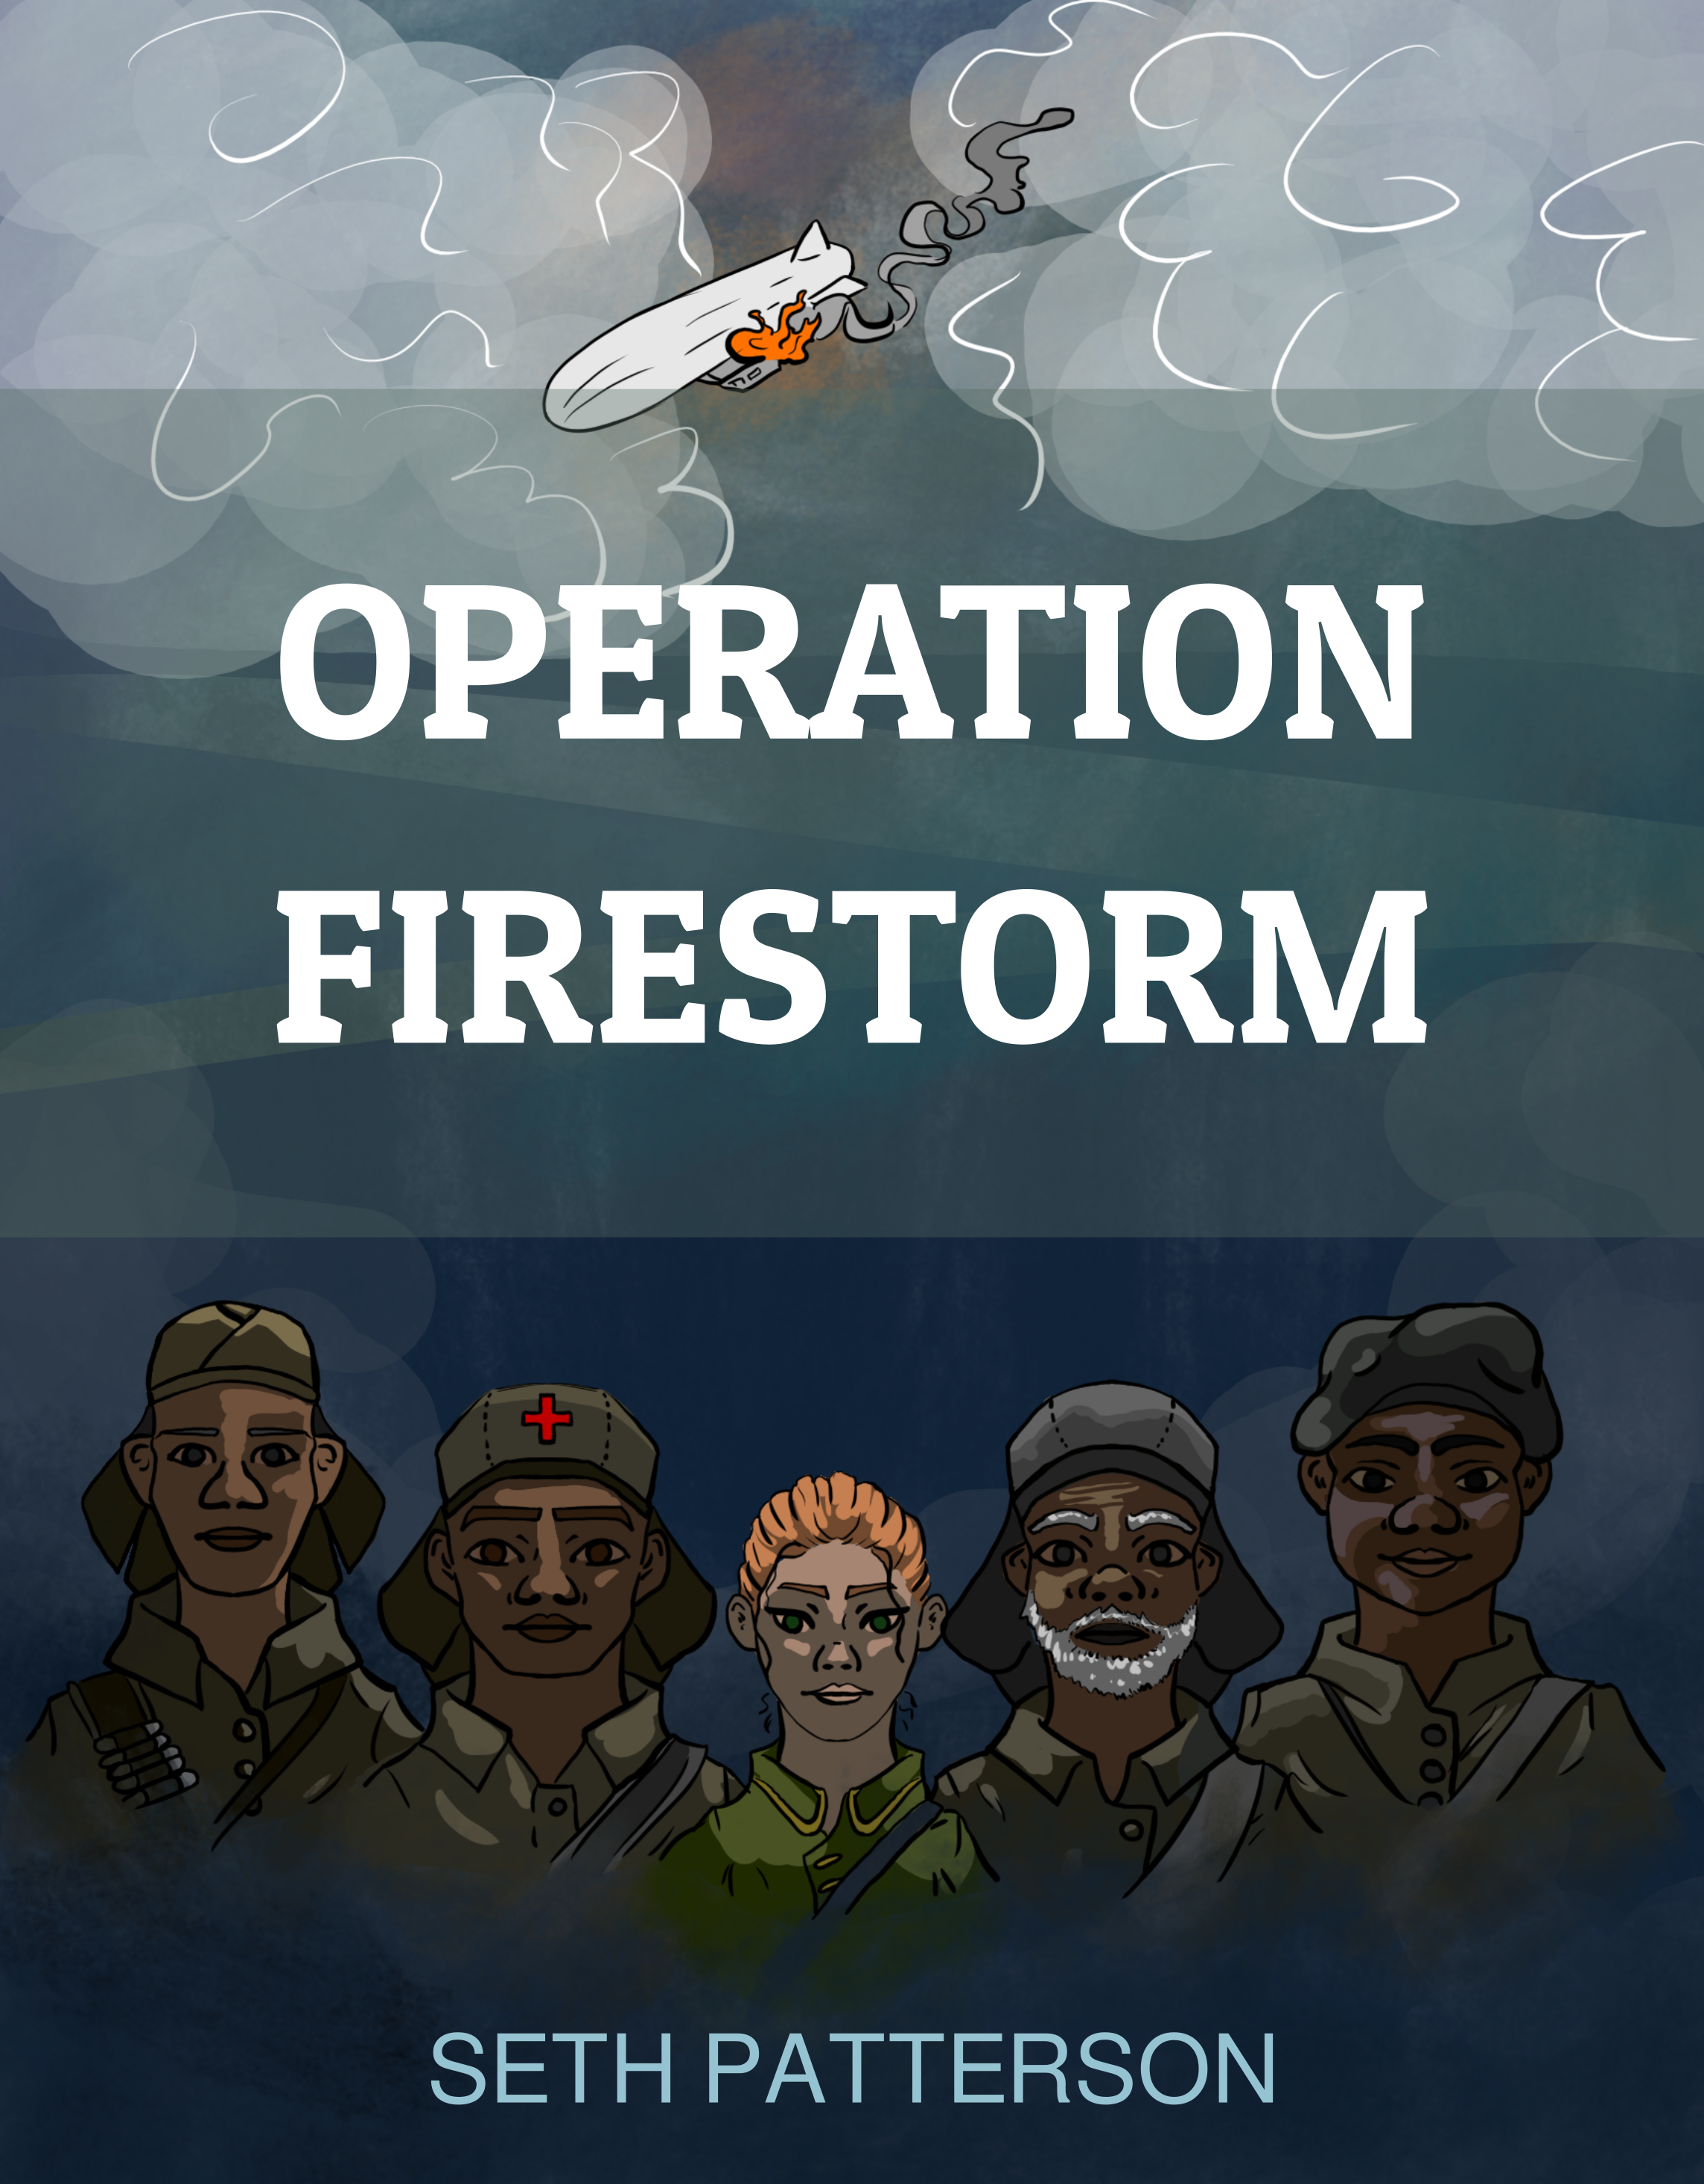 Illustrated book cover: Atop the page, a burning airship hurtles to the ground. At the bottom are five soldiers (Hard, Cougar, Sgt. Desmond Alish, Cotton, and Song). Hard wears a sunhat and bandolier. Cougar's hat has a medic's cross on it. Sgt. Alish has a red-blond ponytail and a light green uniform. Cotton has a white beard and sunhat. Song has a baby face and lumpy cap.